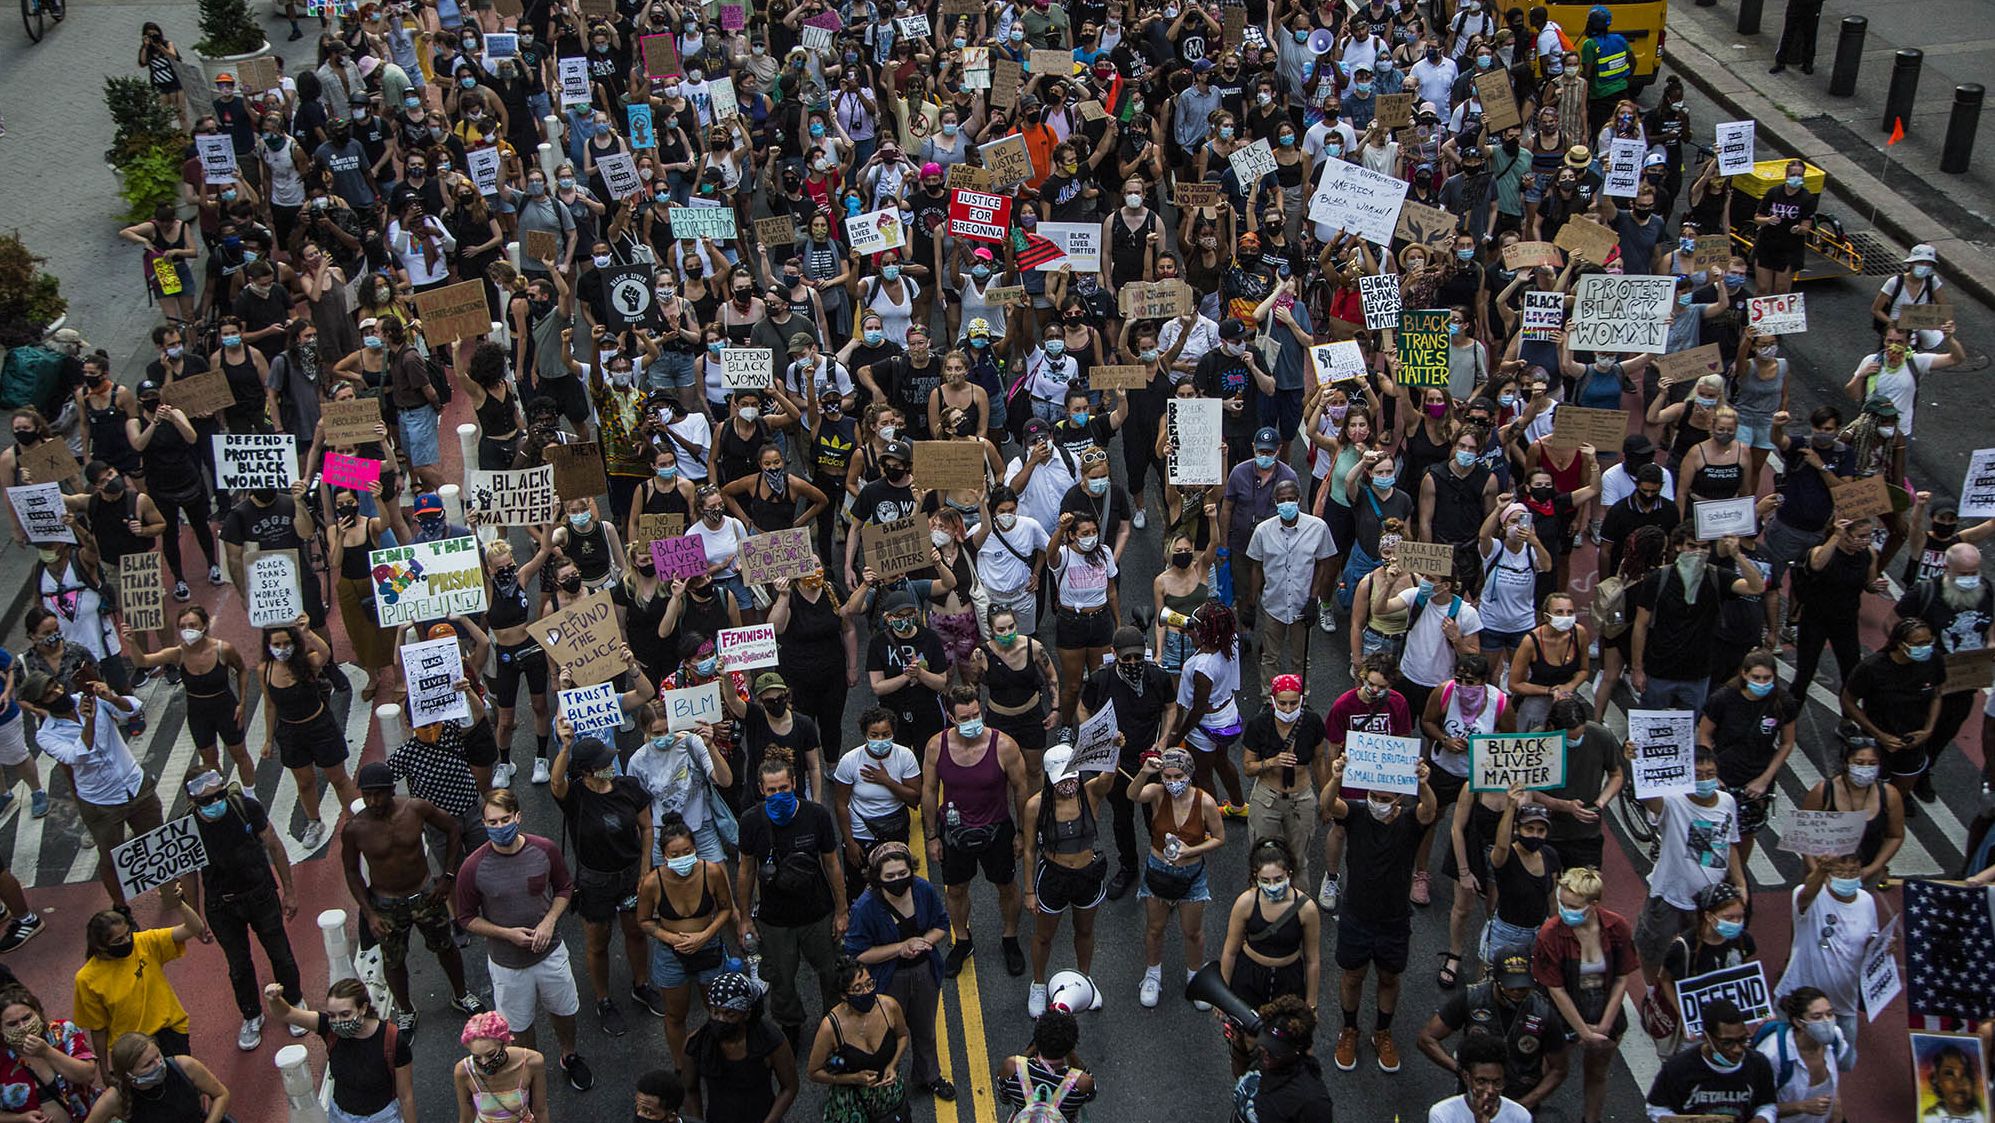 Huge crowd of protesters march in downtown New York on July 26, 2020. Hundreds of activists marched to condemn what they see as an excessive focus by the federal authorities in Portland, Oregon, and to support the movements of Black Lives Matter.